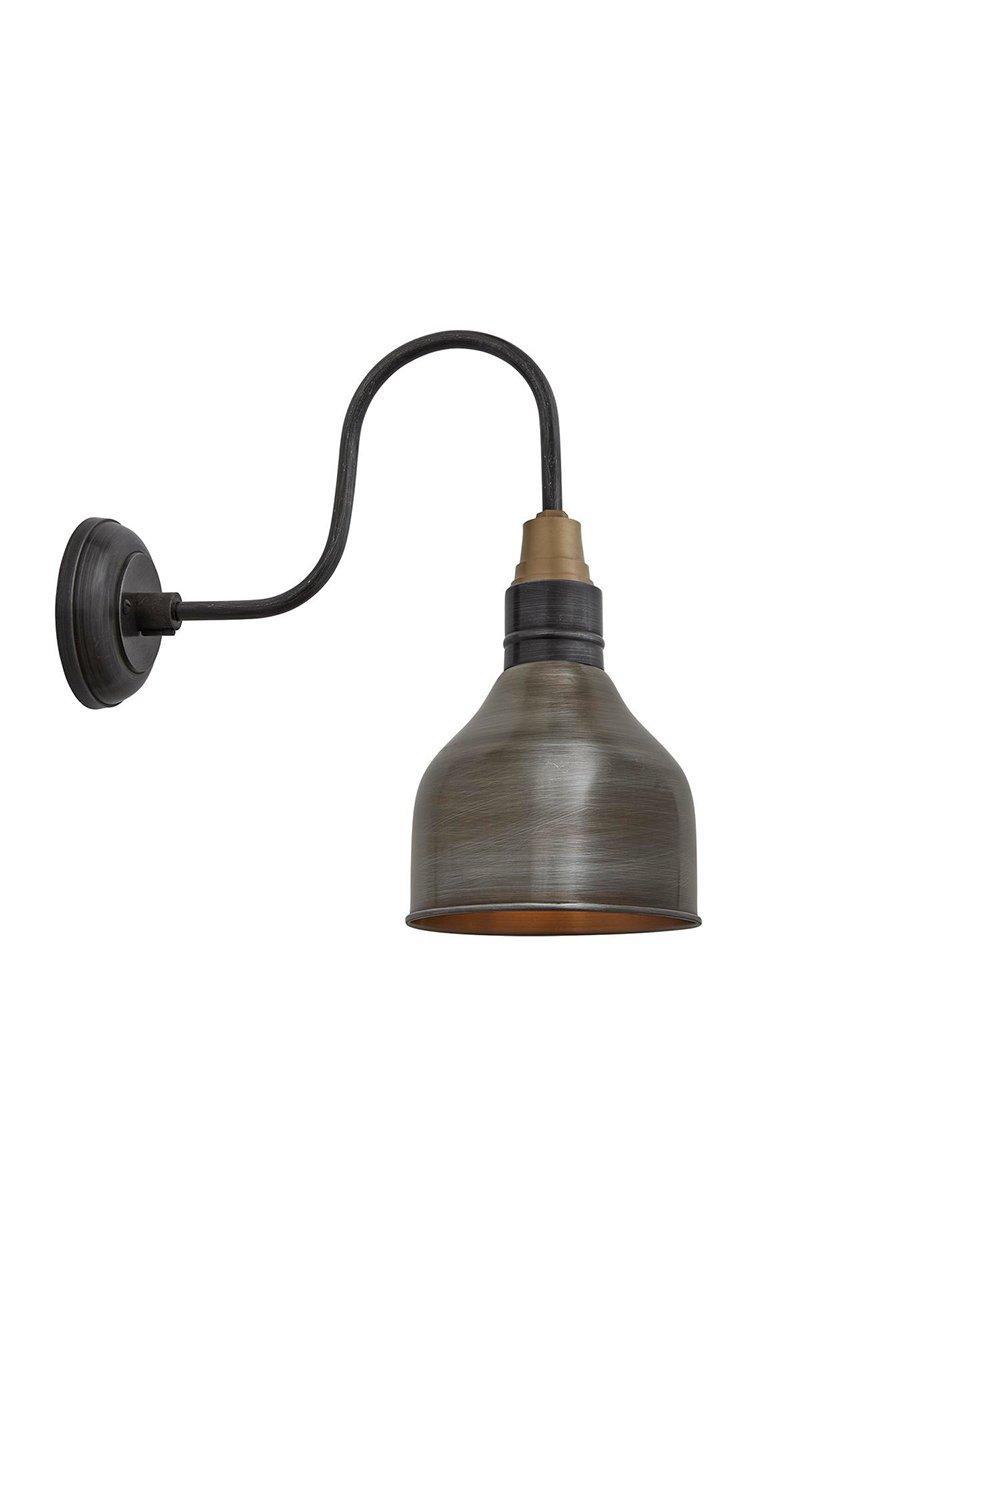 Swan Neck Cone Wall Light, 7 Inch, Pewter, Pewter Holder